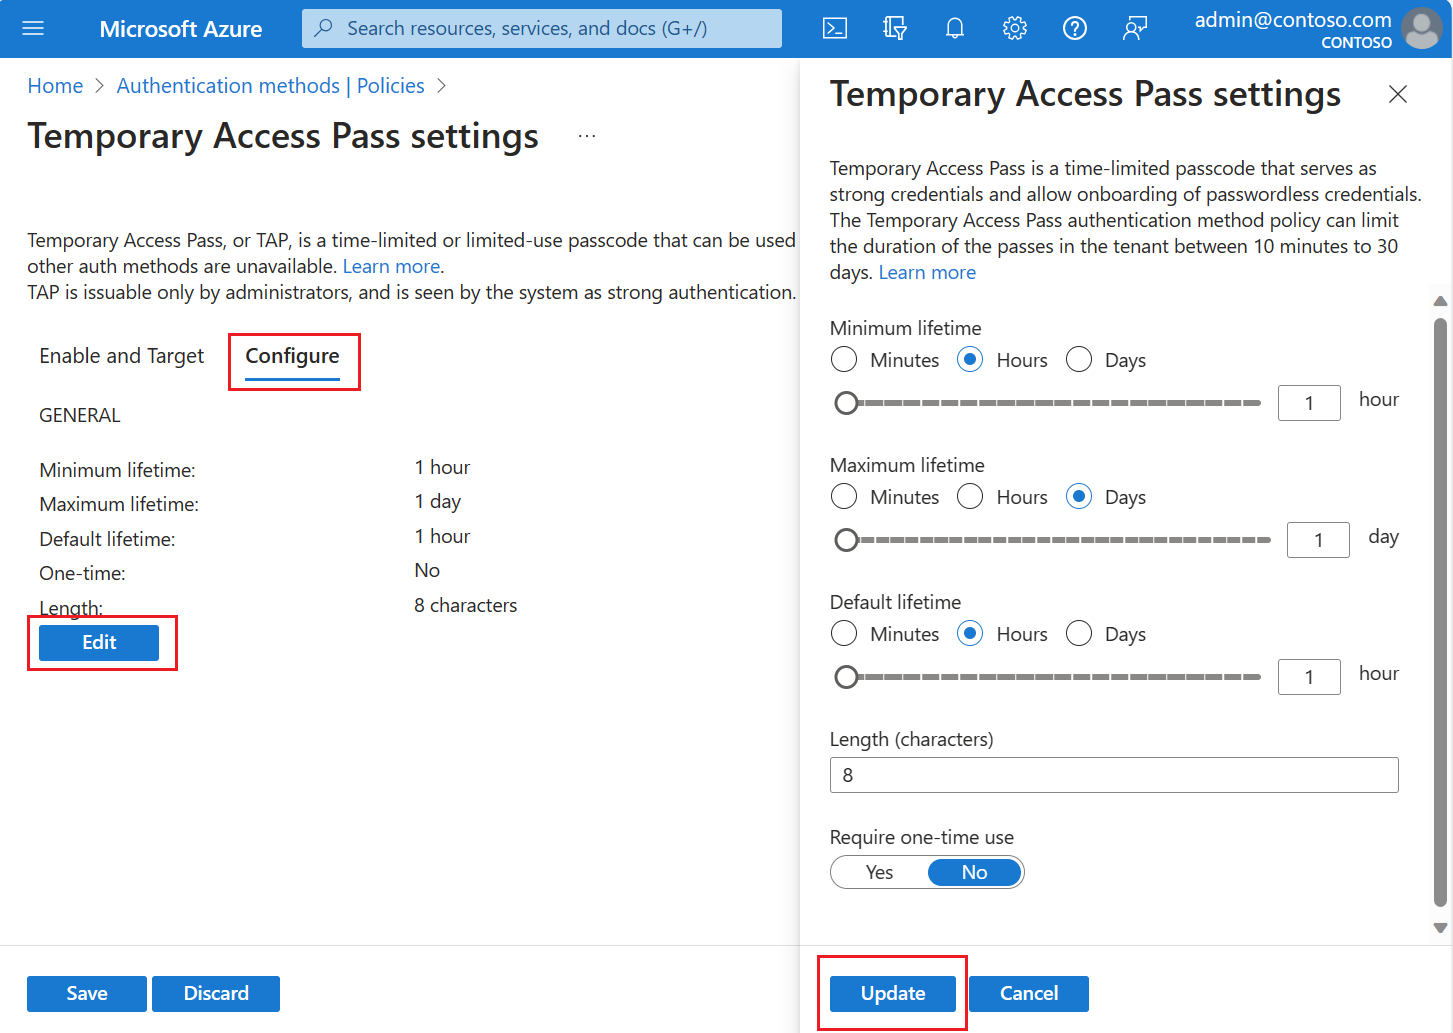 Screenshot of how to customize the settings for Temporary Access Pass.